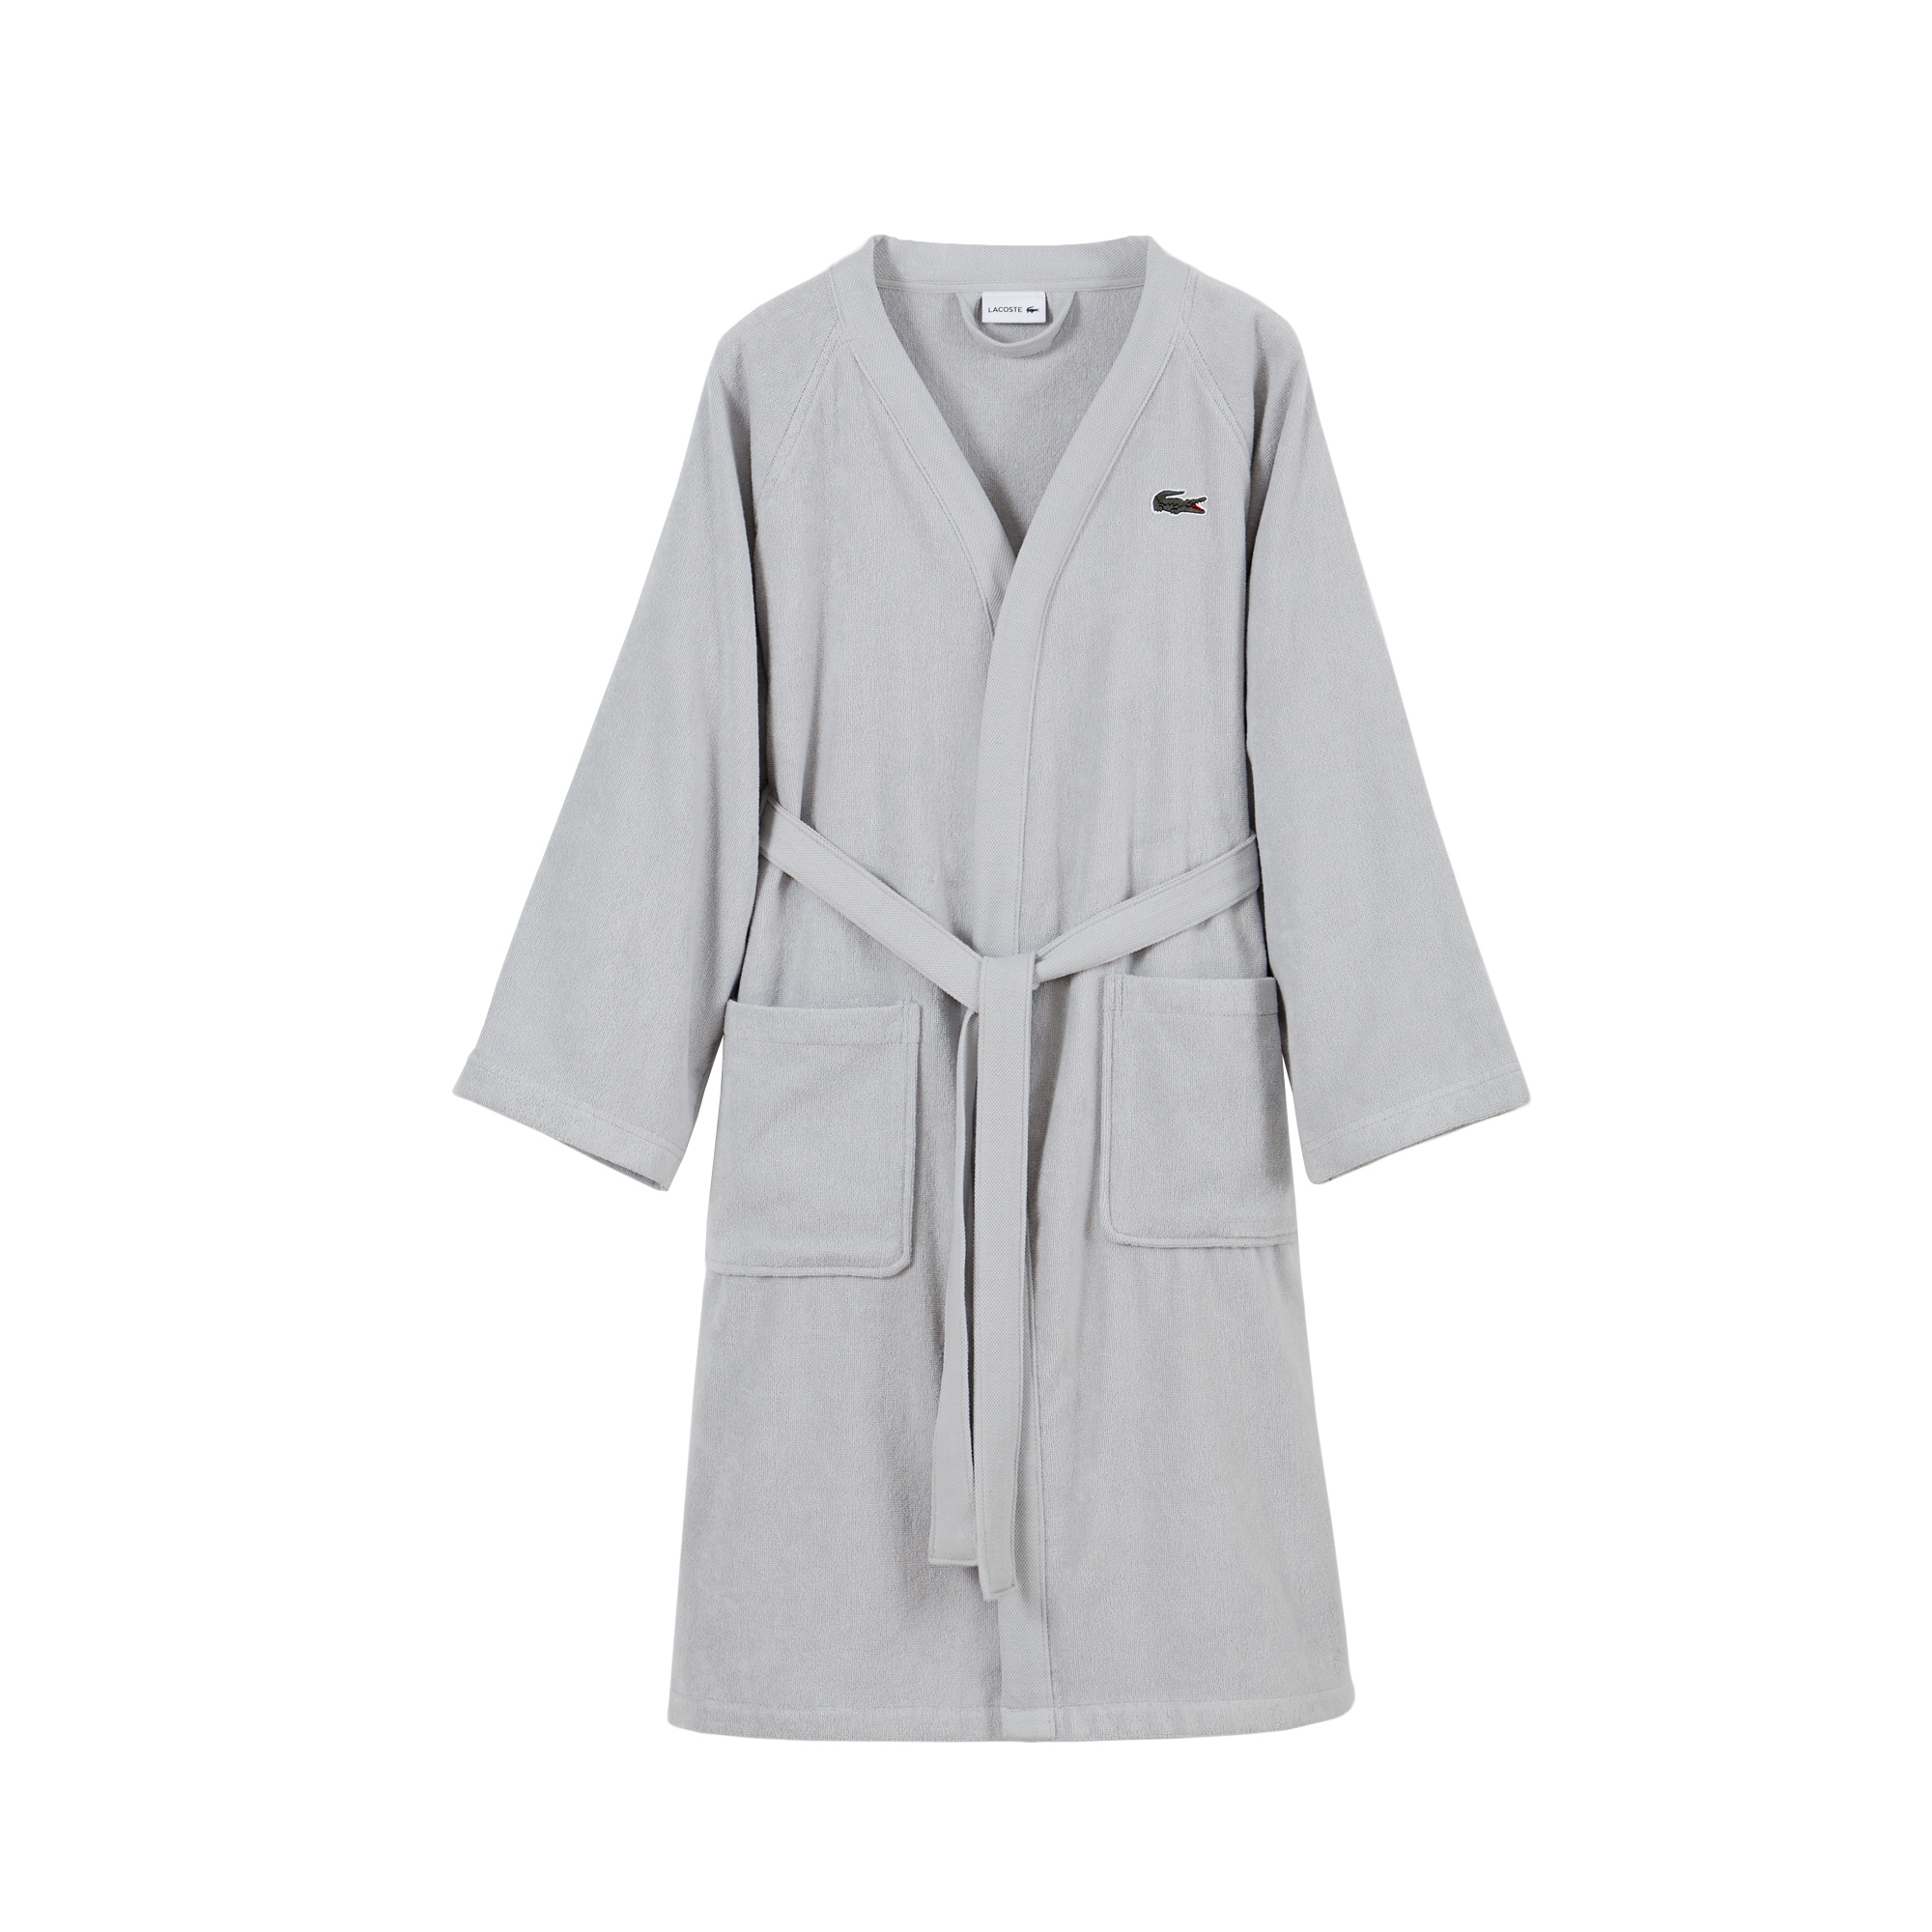 https://ak1.ostkcdn.com/images/products/is/images/direct/f96c57ff212a40a18990247034a192c60ff0714b/Lacoste-Classic-Pique-Robe.jpg